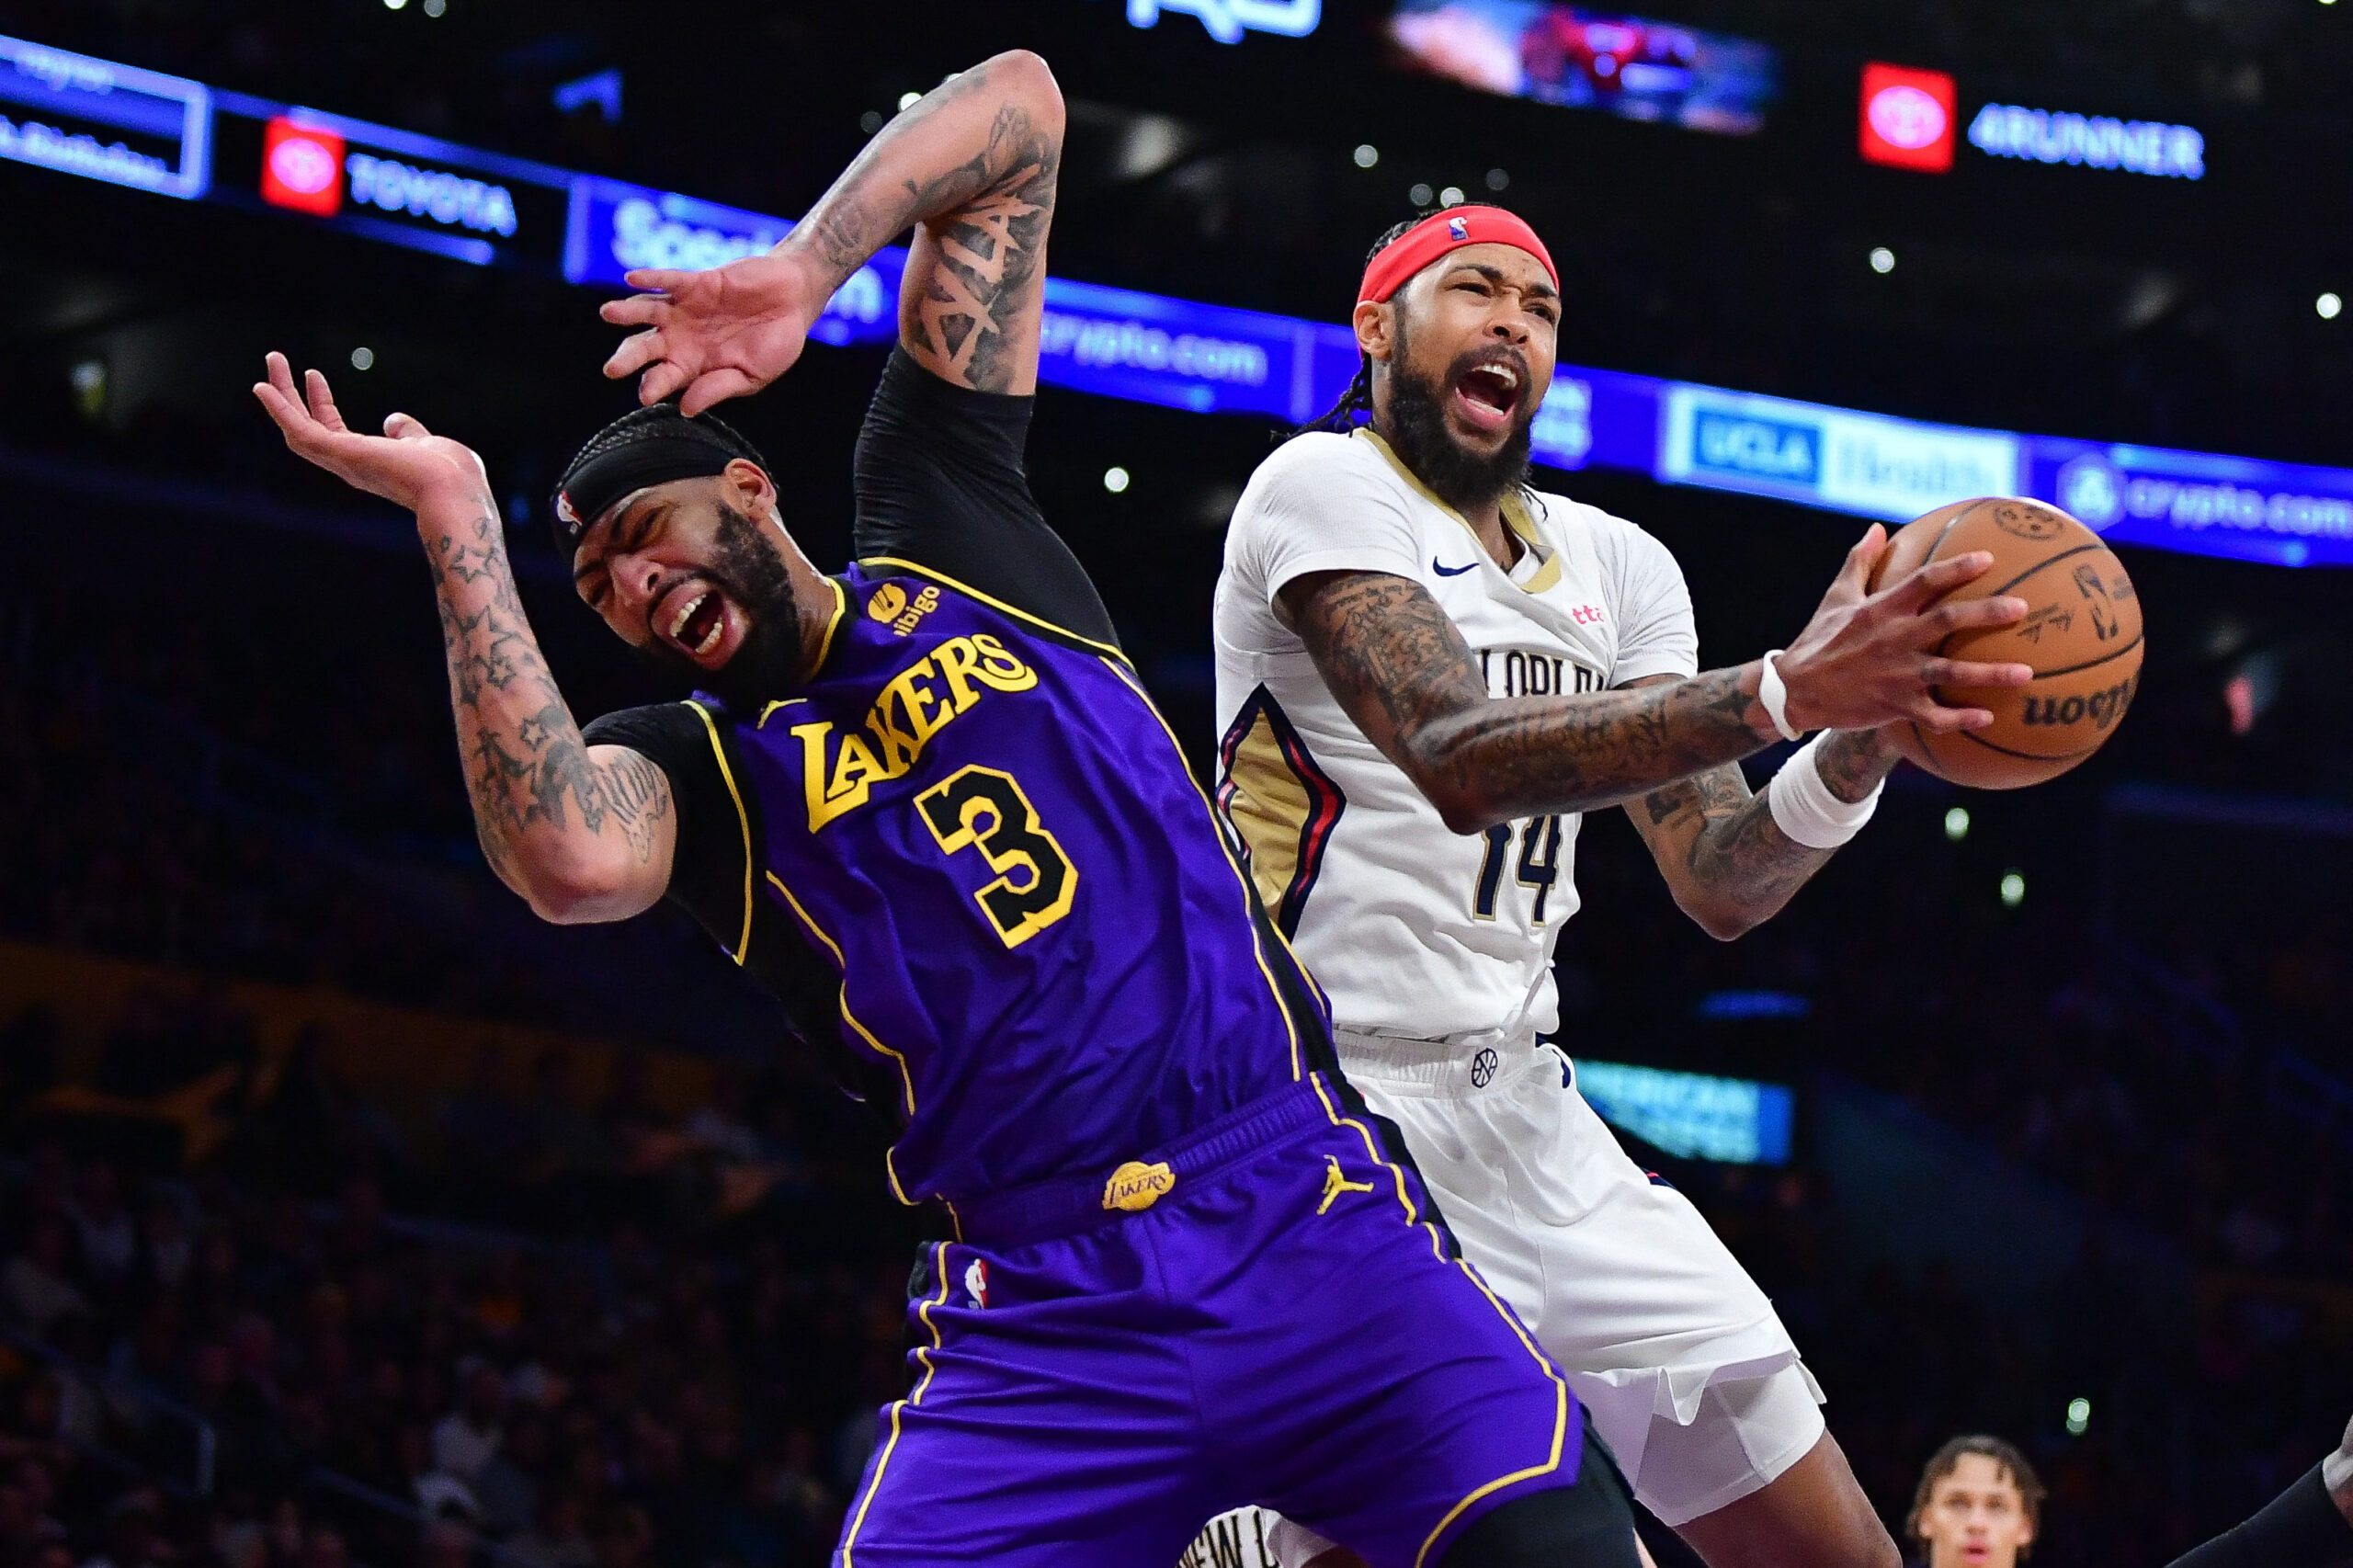 Hot-starting Lakers drop record 51 in 2nd quarter over Pelicans